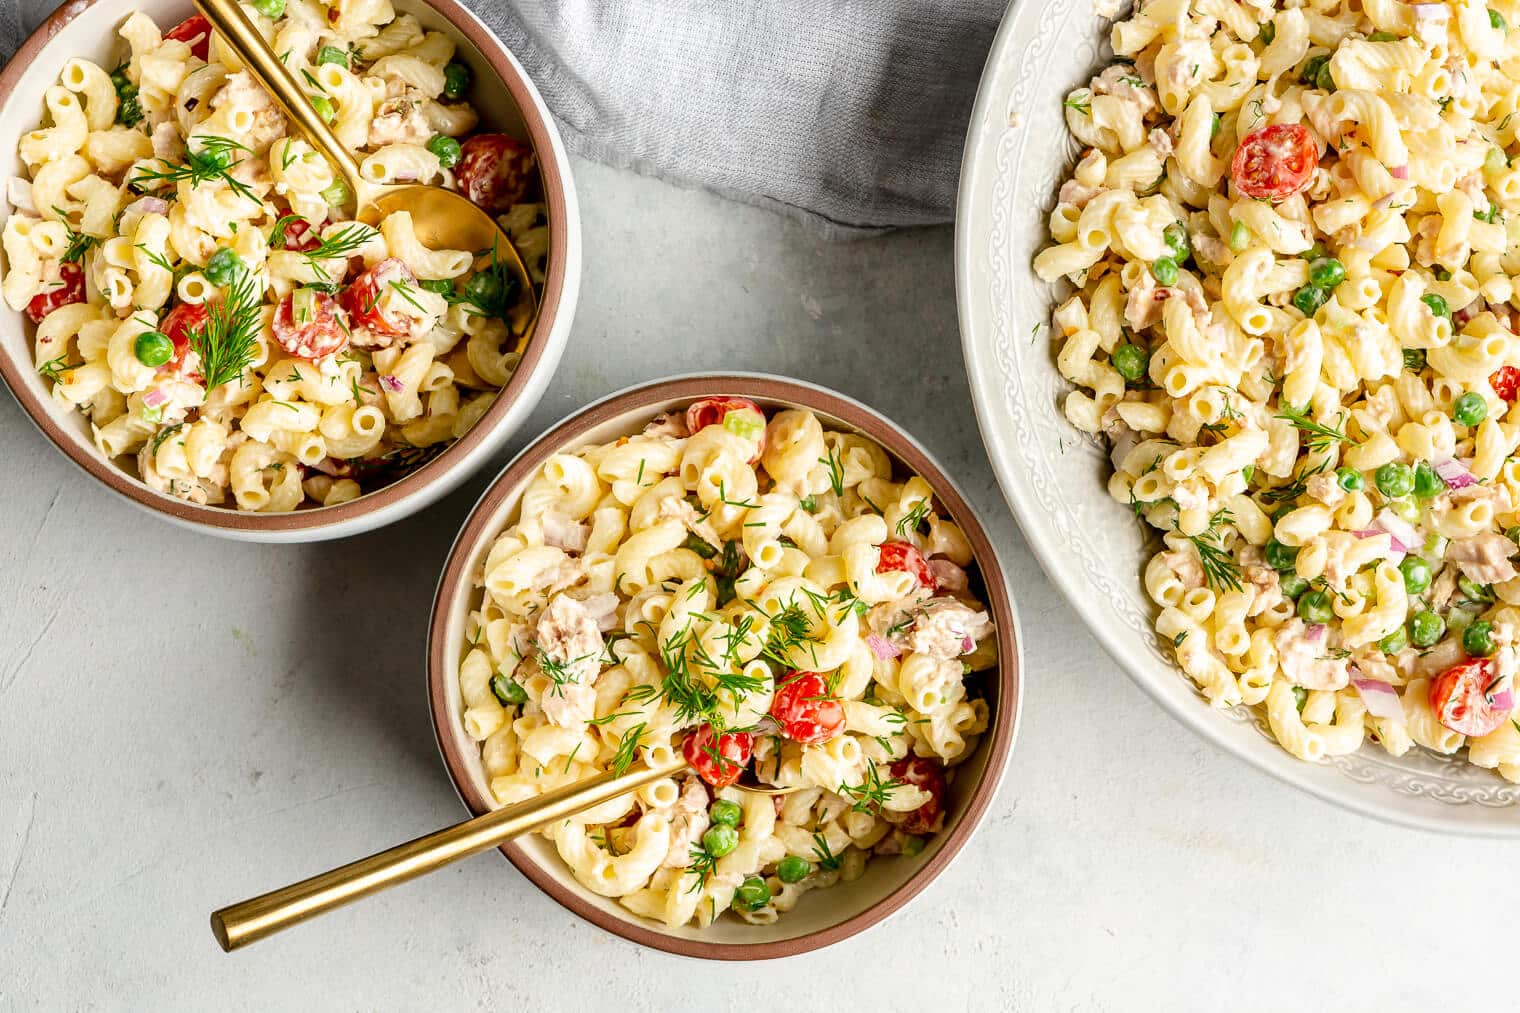 Top view of a large dish of creamy tuna pasta salad next to two servings of pasta salad in bowls.